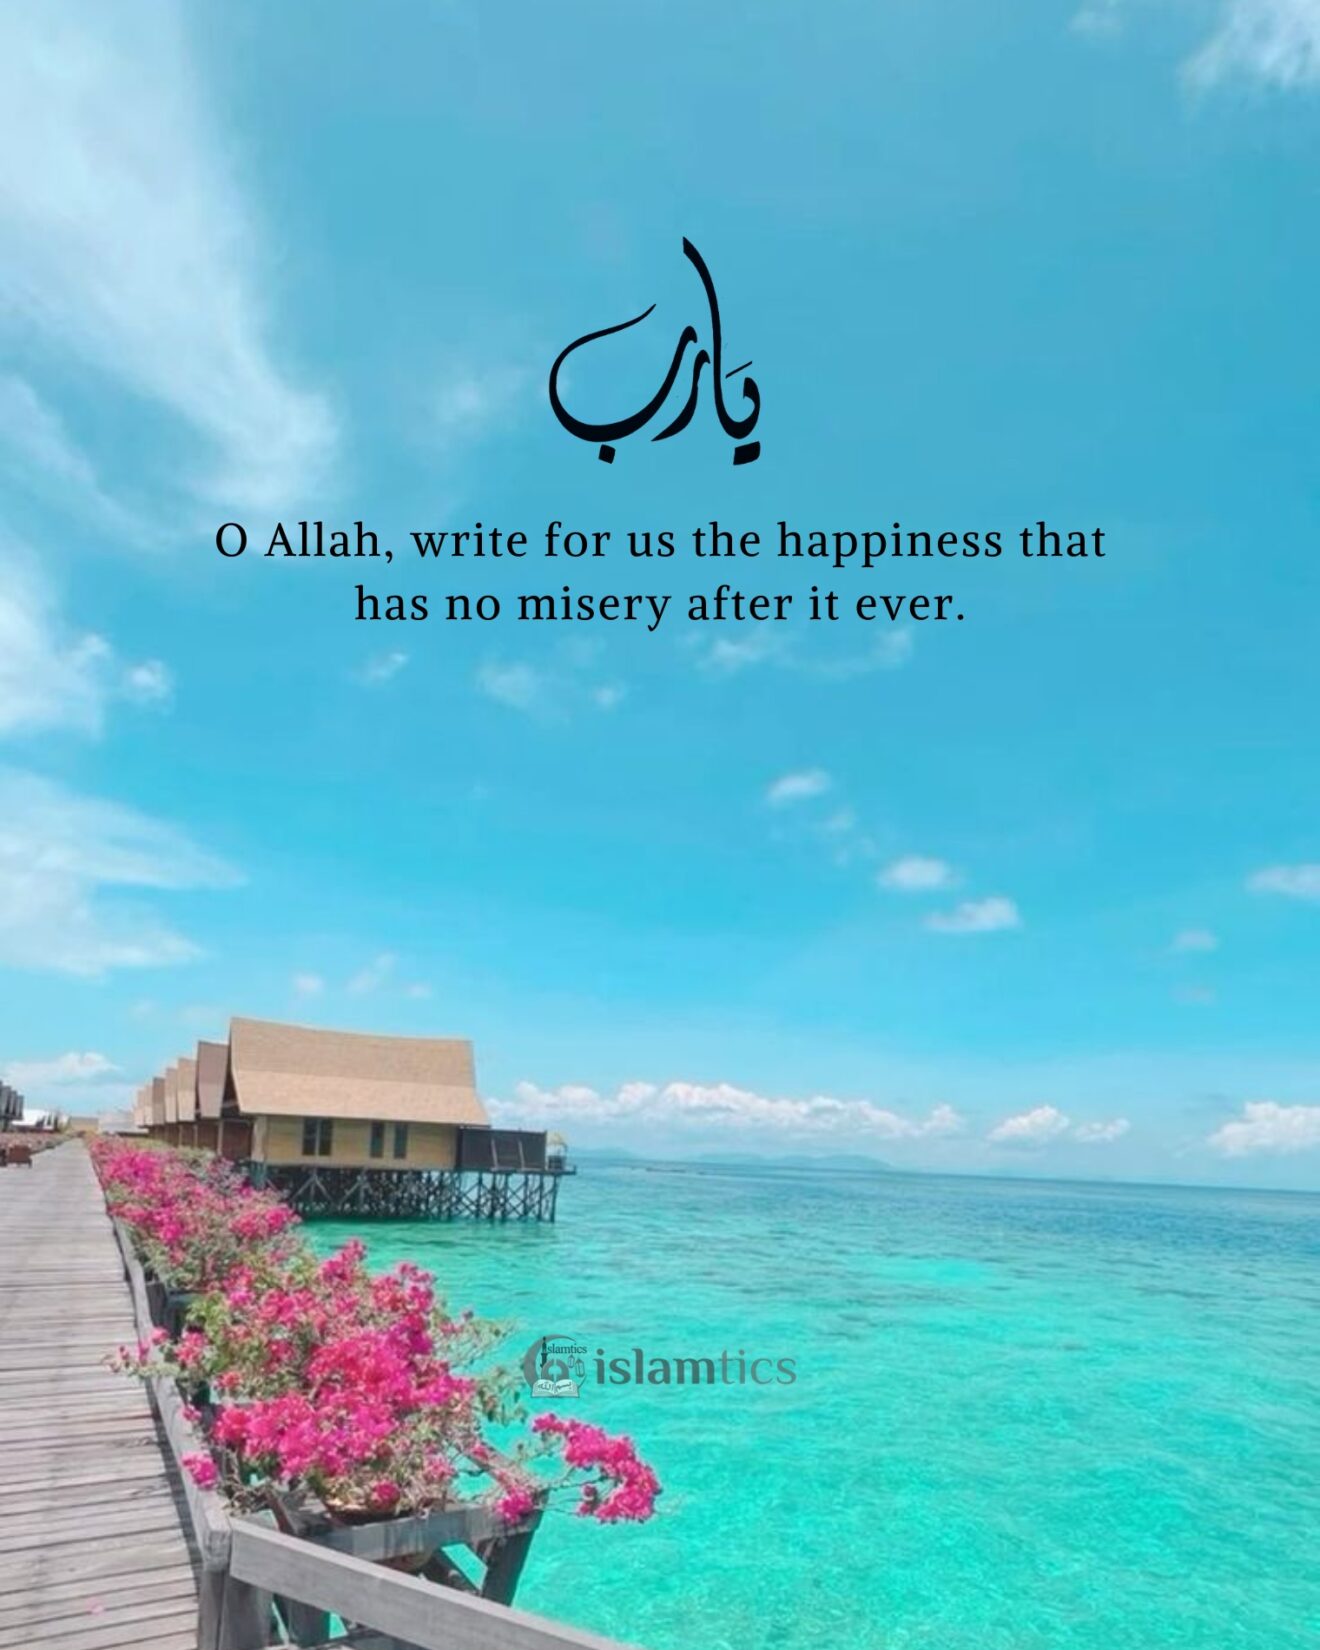  O Allah, write for us the happiness that has no misery after it ever.